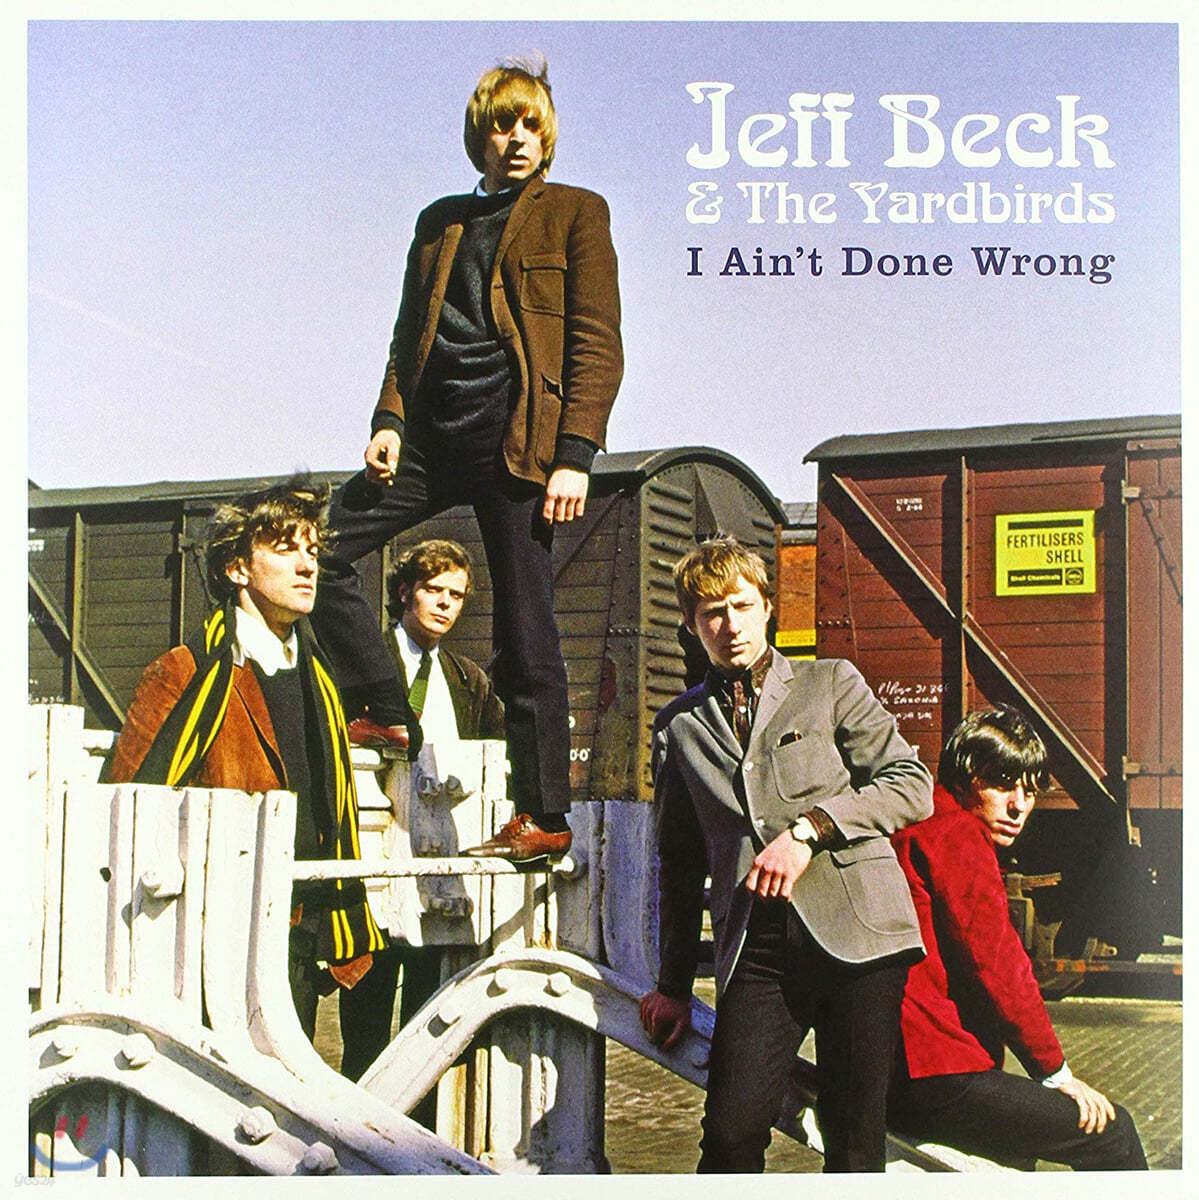 Jeff Beck &amp; The Yardbirds (제프 벡 &amp; 야드버즈) - I Ain’t Done Wrong [LP]